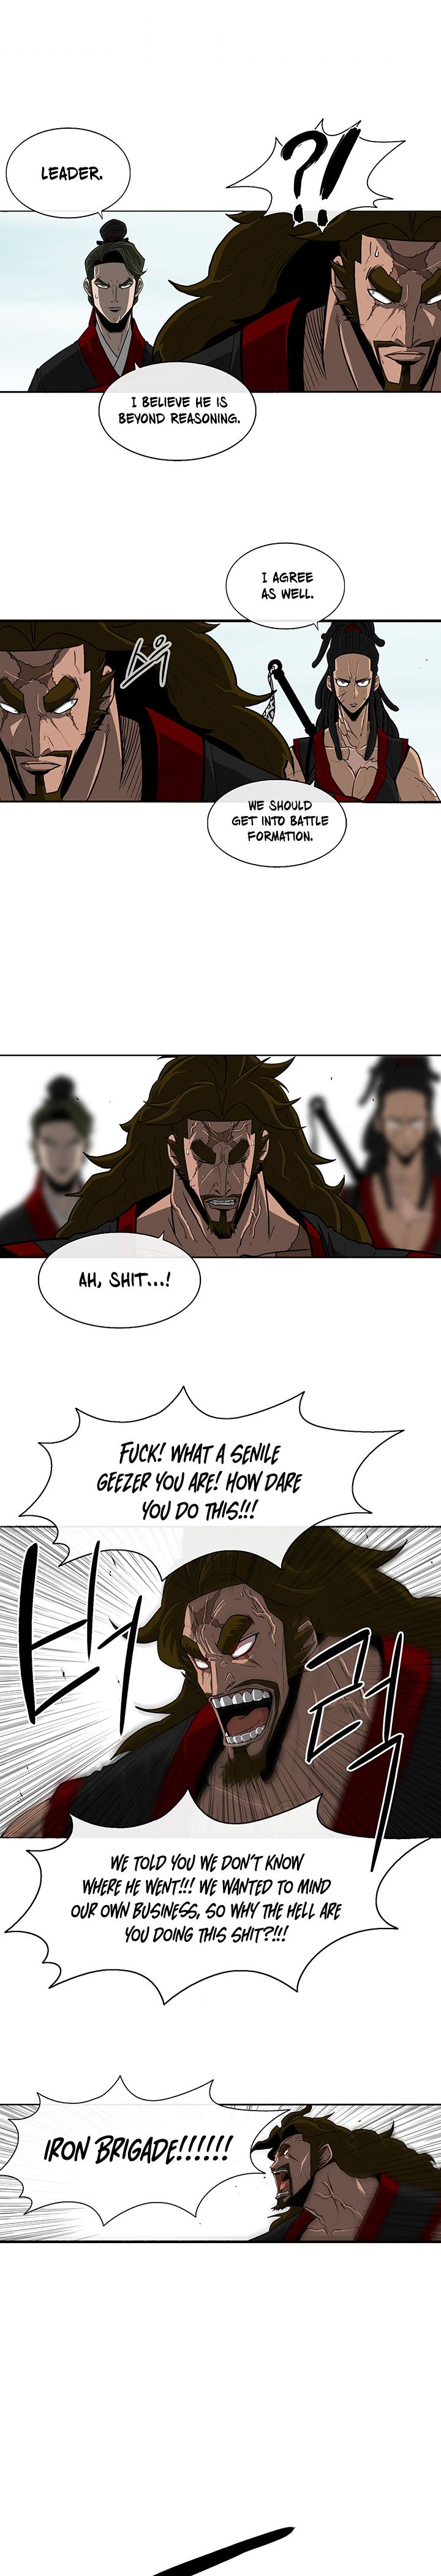 Legend of the Northern Blade chapter 61 page 3